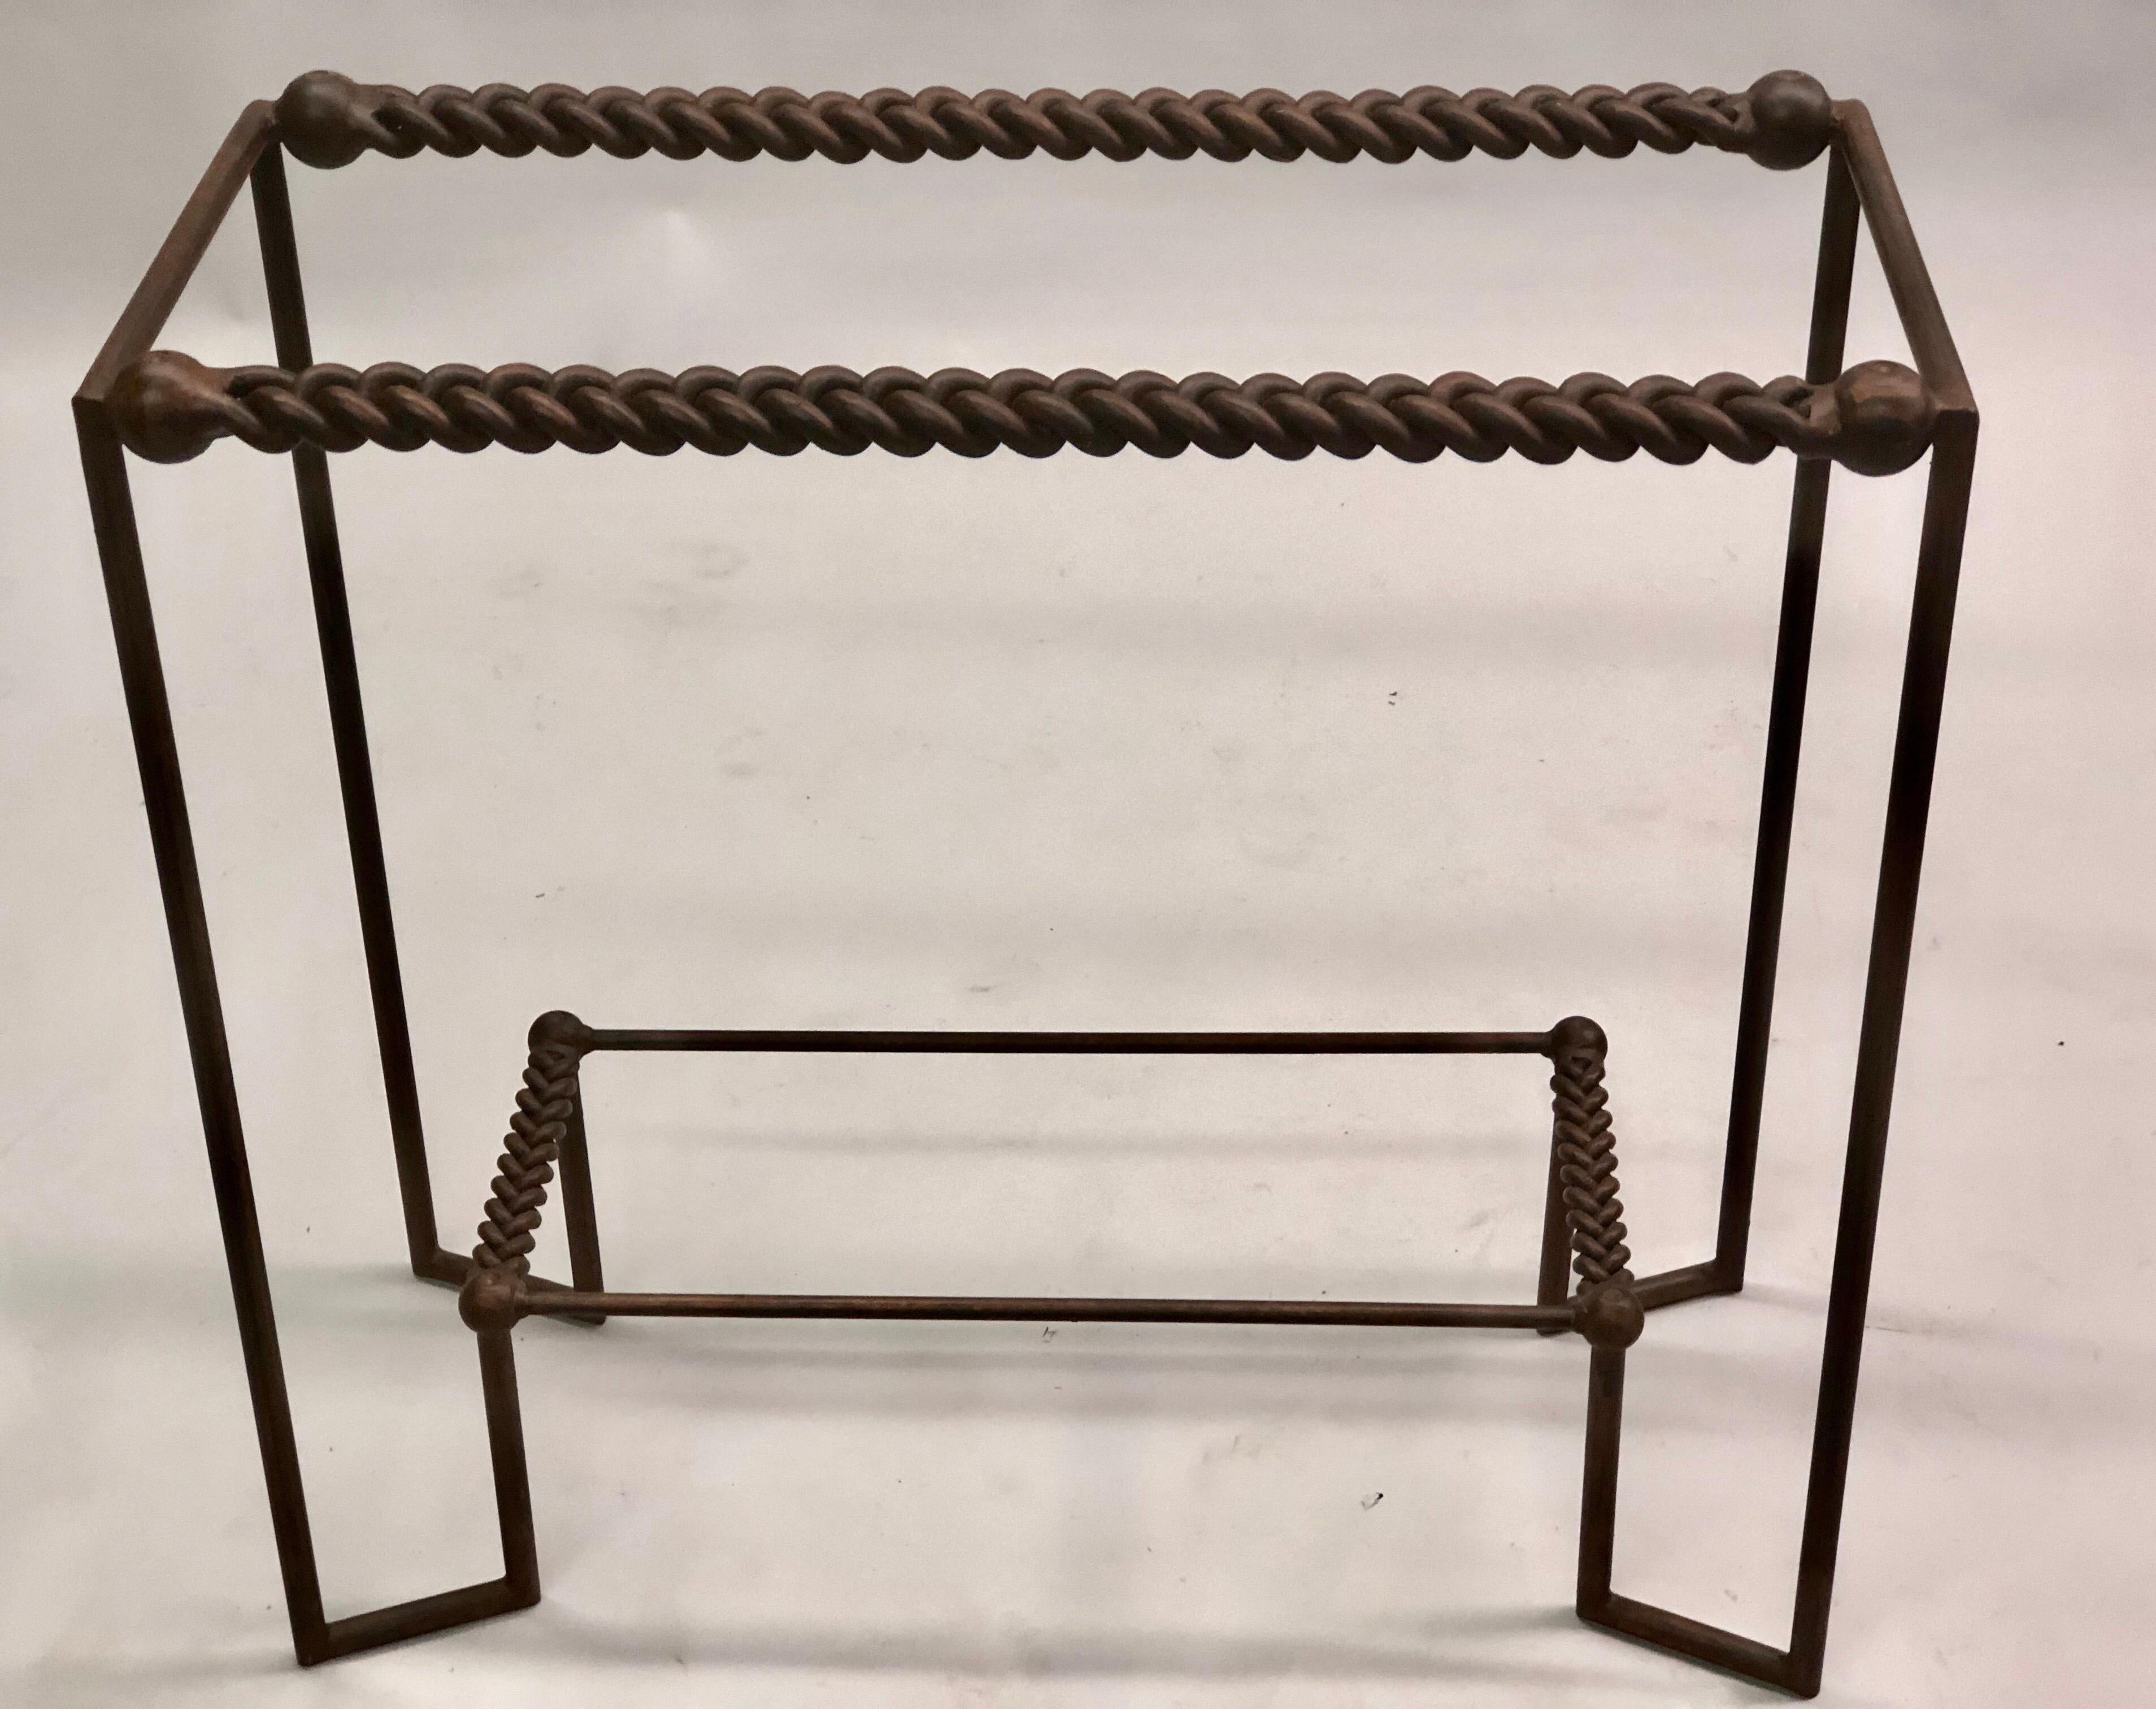 A Rare and Elegant Italian Midcentury console / sofa table in the Modern Neoclassical spirit in hand-hammered and braided wrought iron by Giovanni Banci. The piece is shown without a top. The piece will accommodate glass or stone. Giovanni Banci was